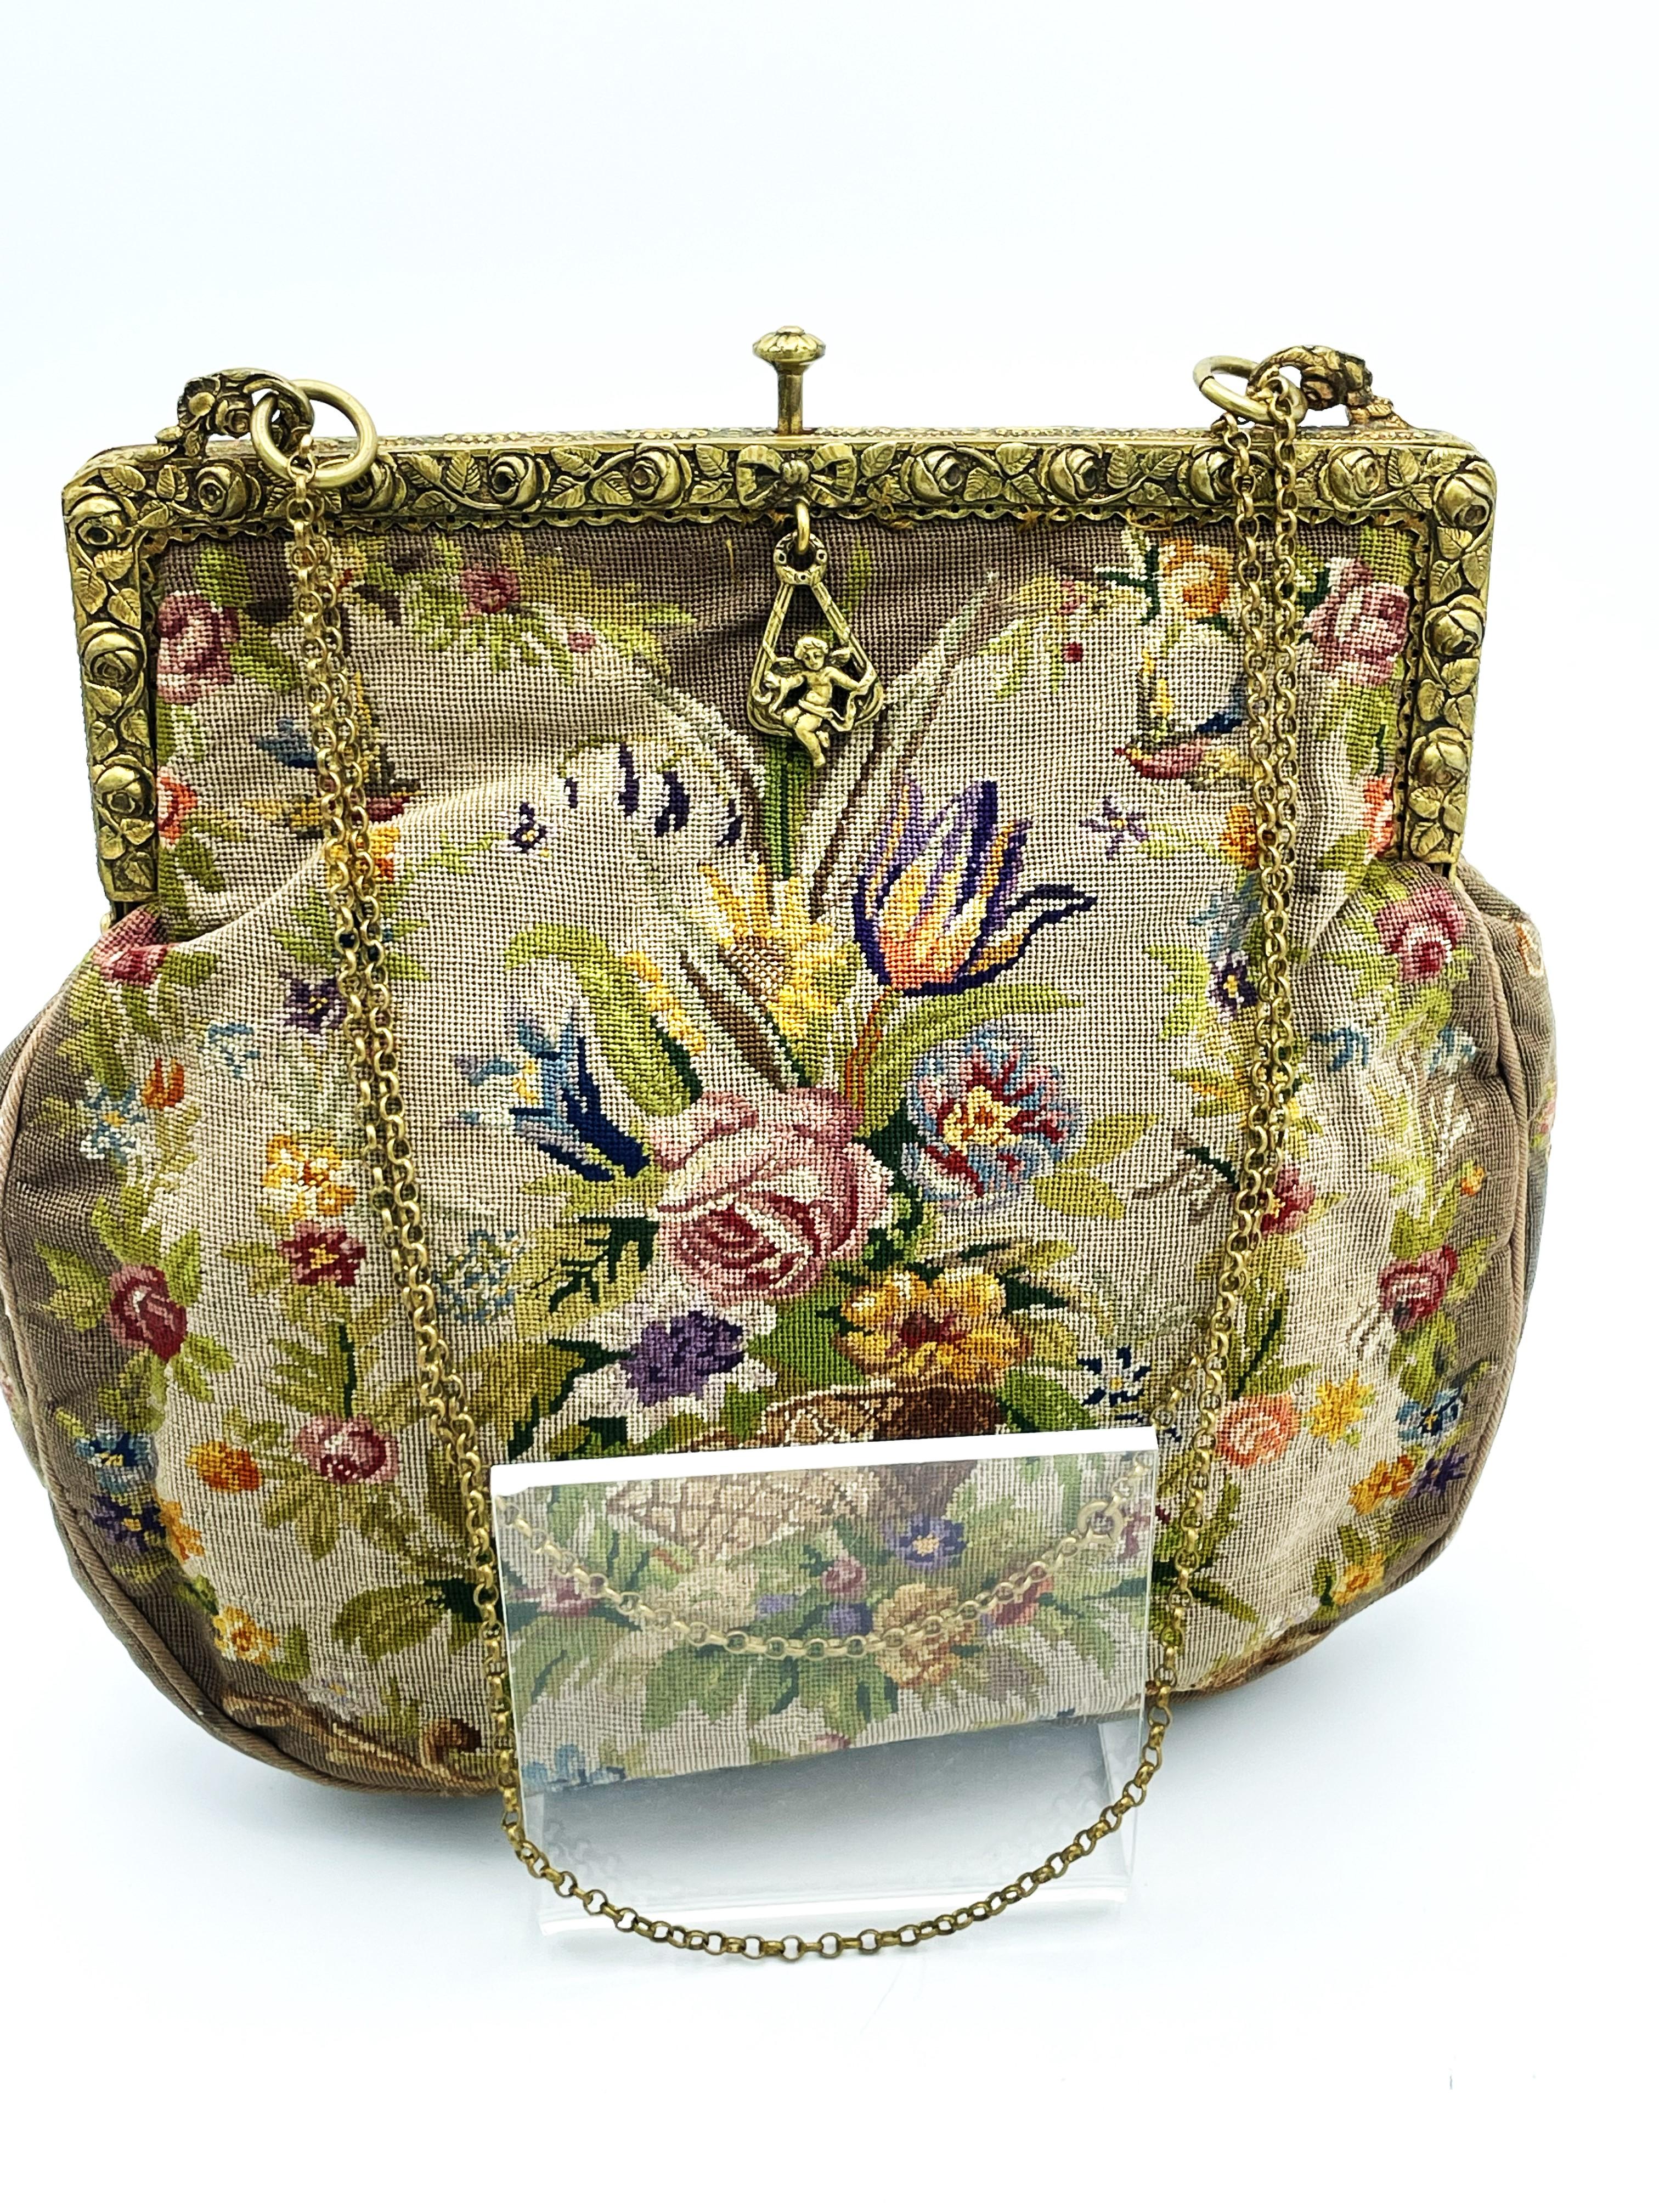 A hand embroidered evening bag with petit point embroidery all around. Front and back as well as the side stripes. Petit point is a fine magnifying glass work, The bag was embroidered in Germany at the turn of the century. Around 19th century. This